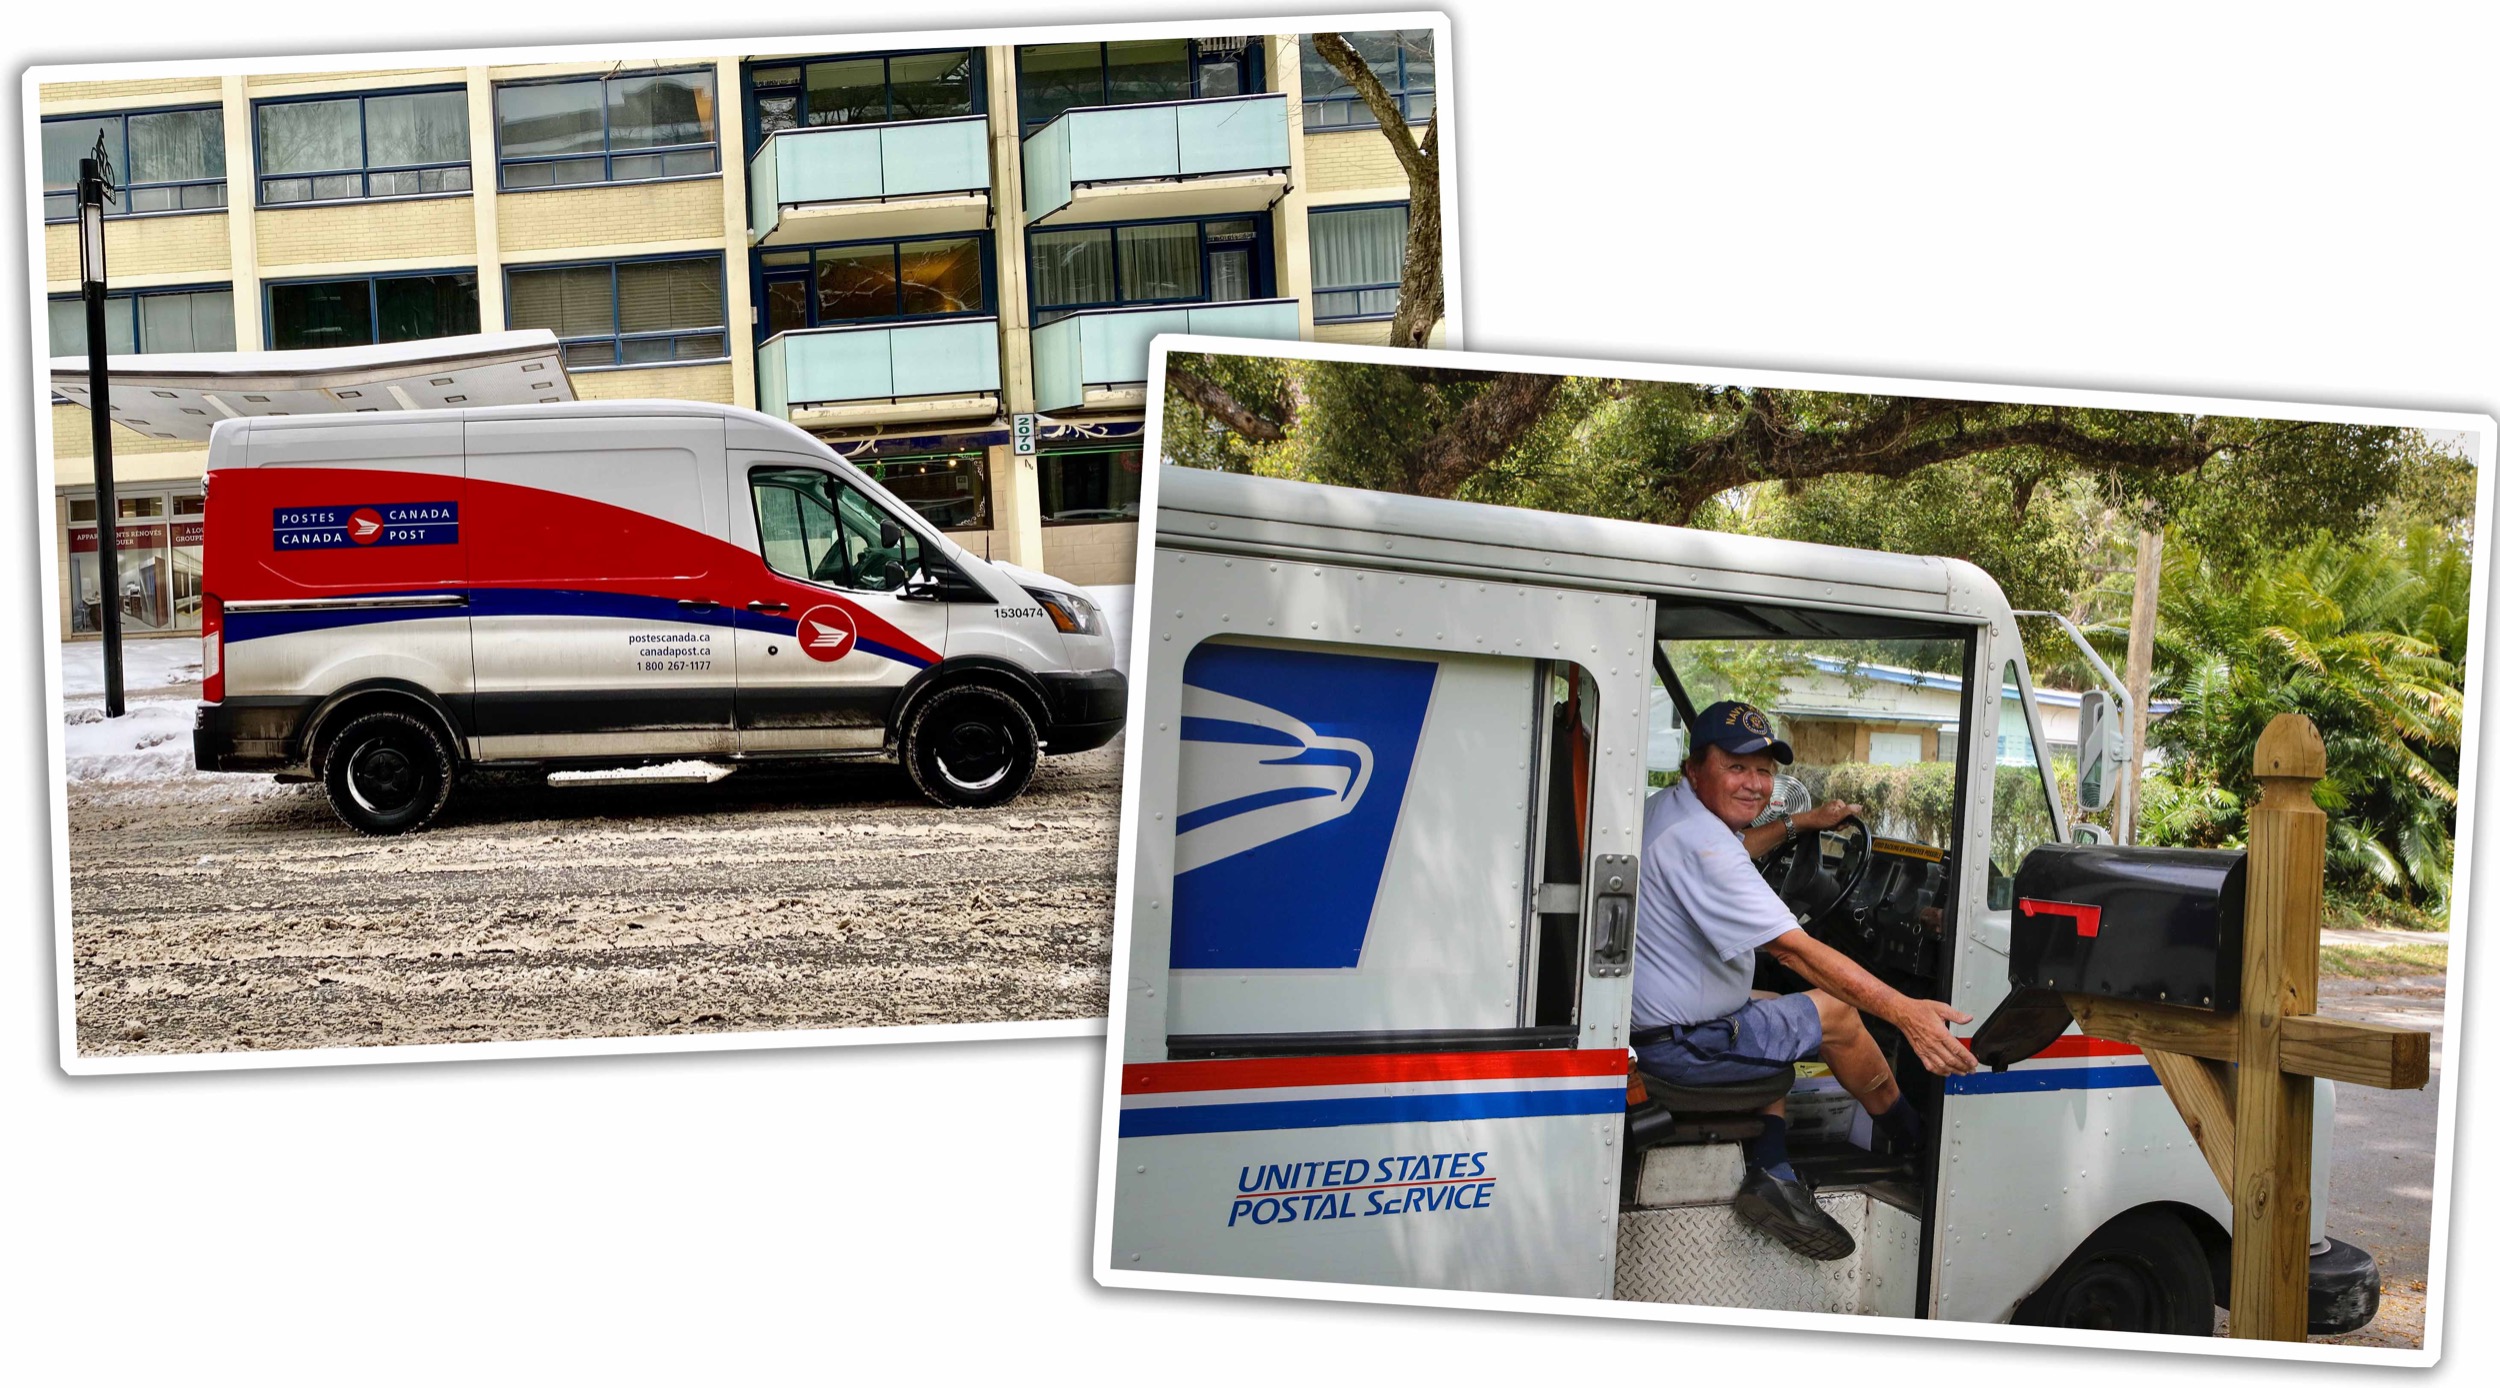 Canada Post and US Mail Delivery trucks